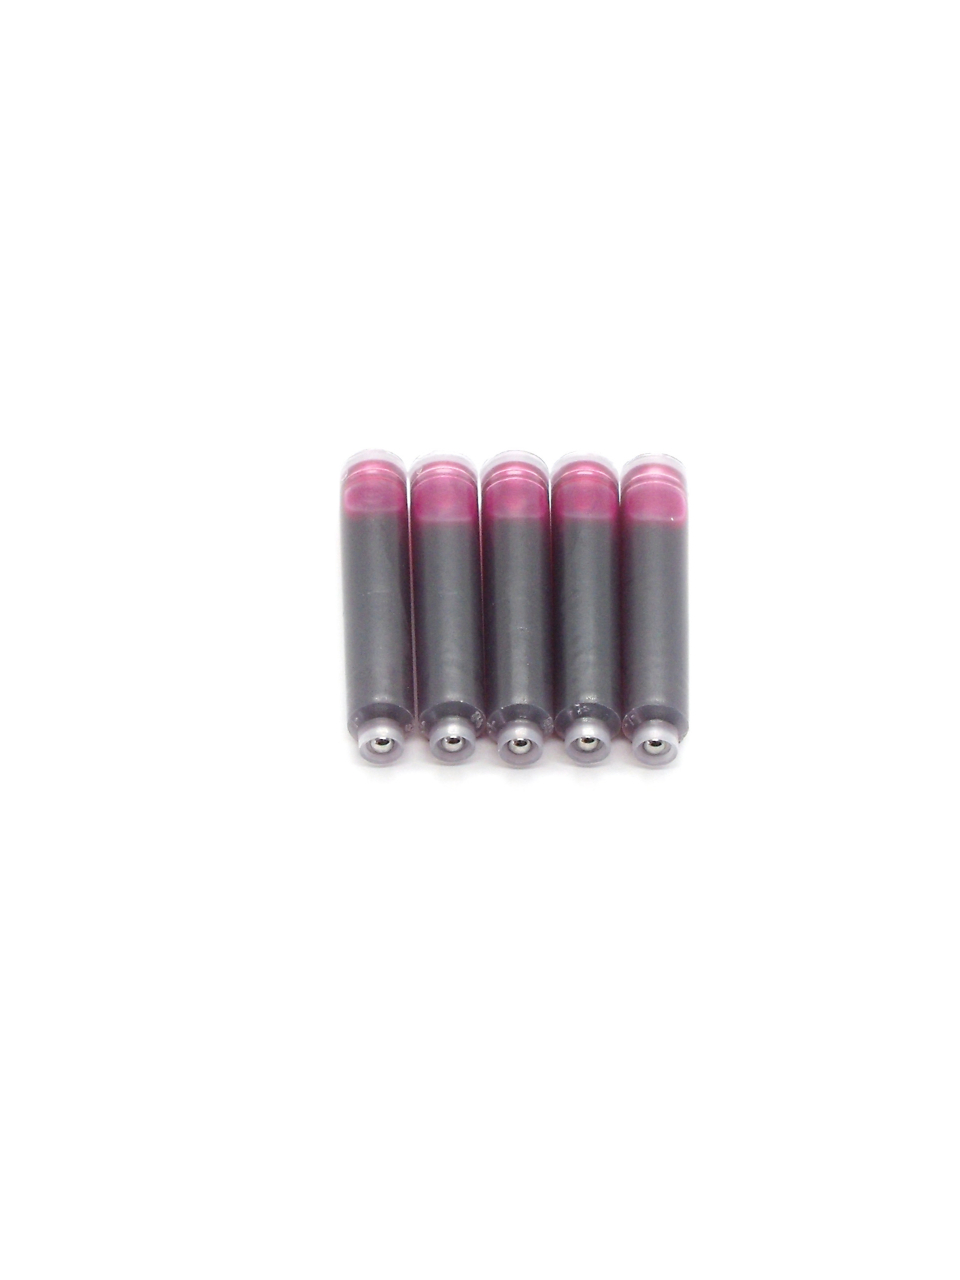 Top Ink Cartridges For Laban Fountain Pens (Pink)